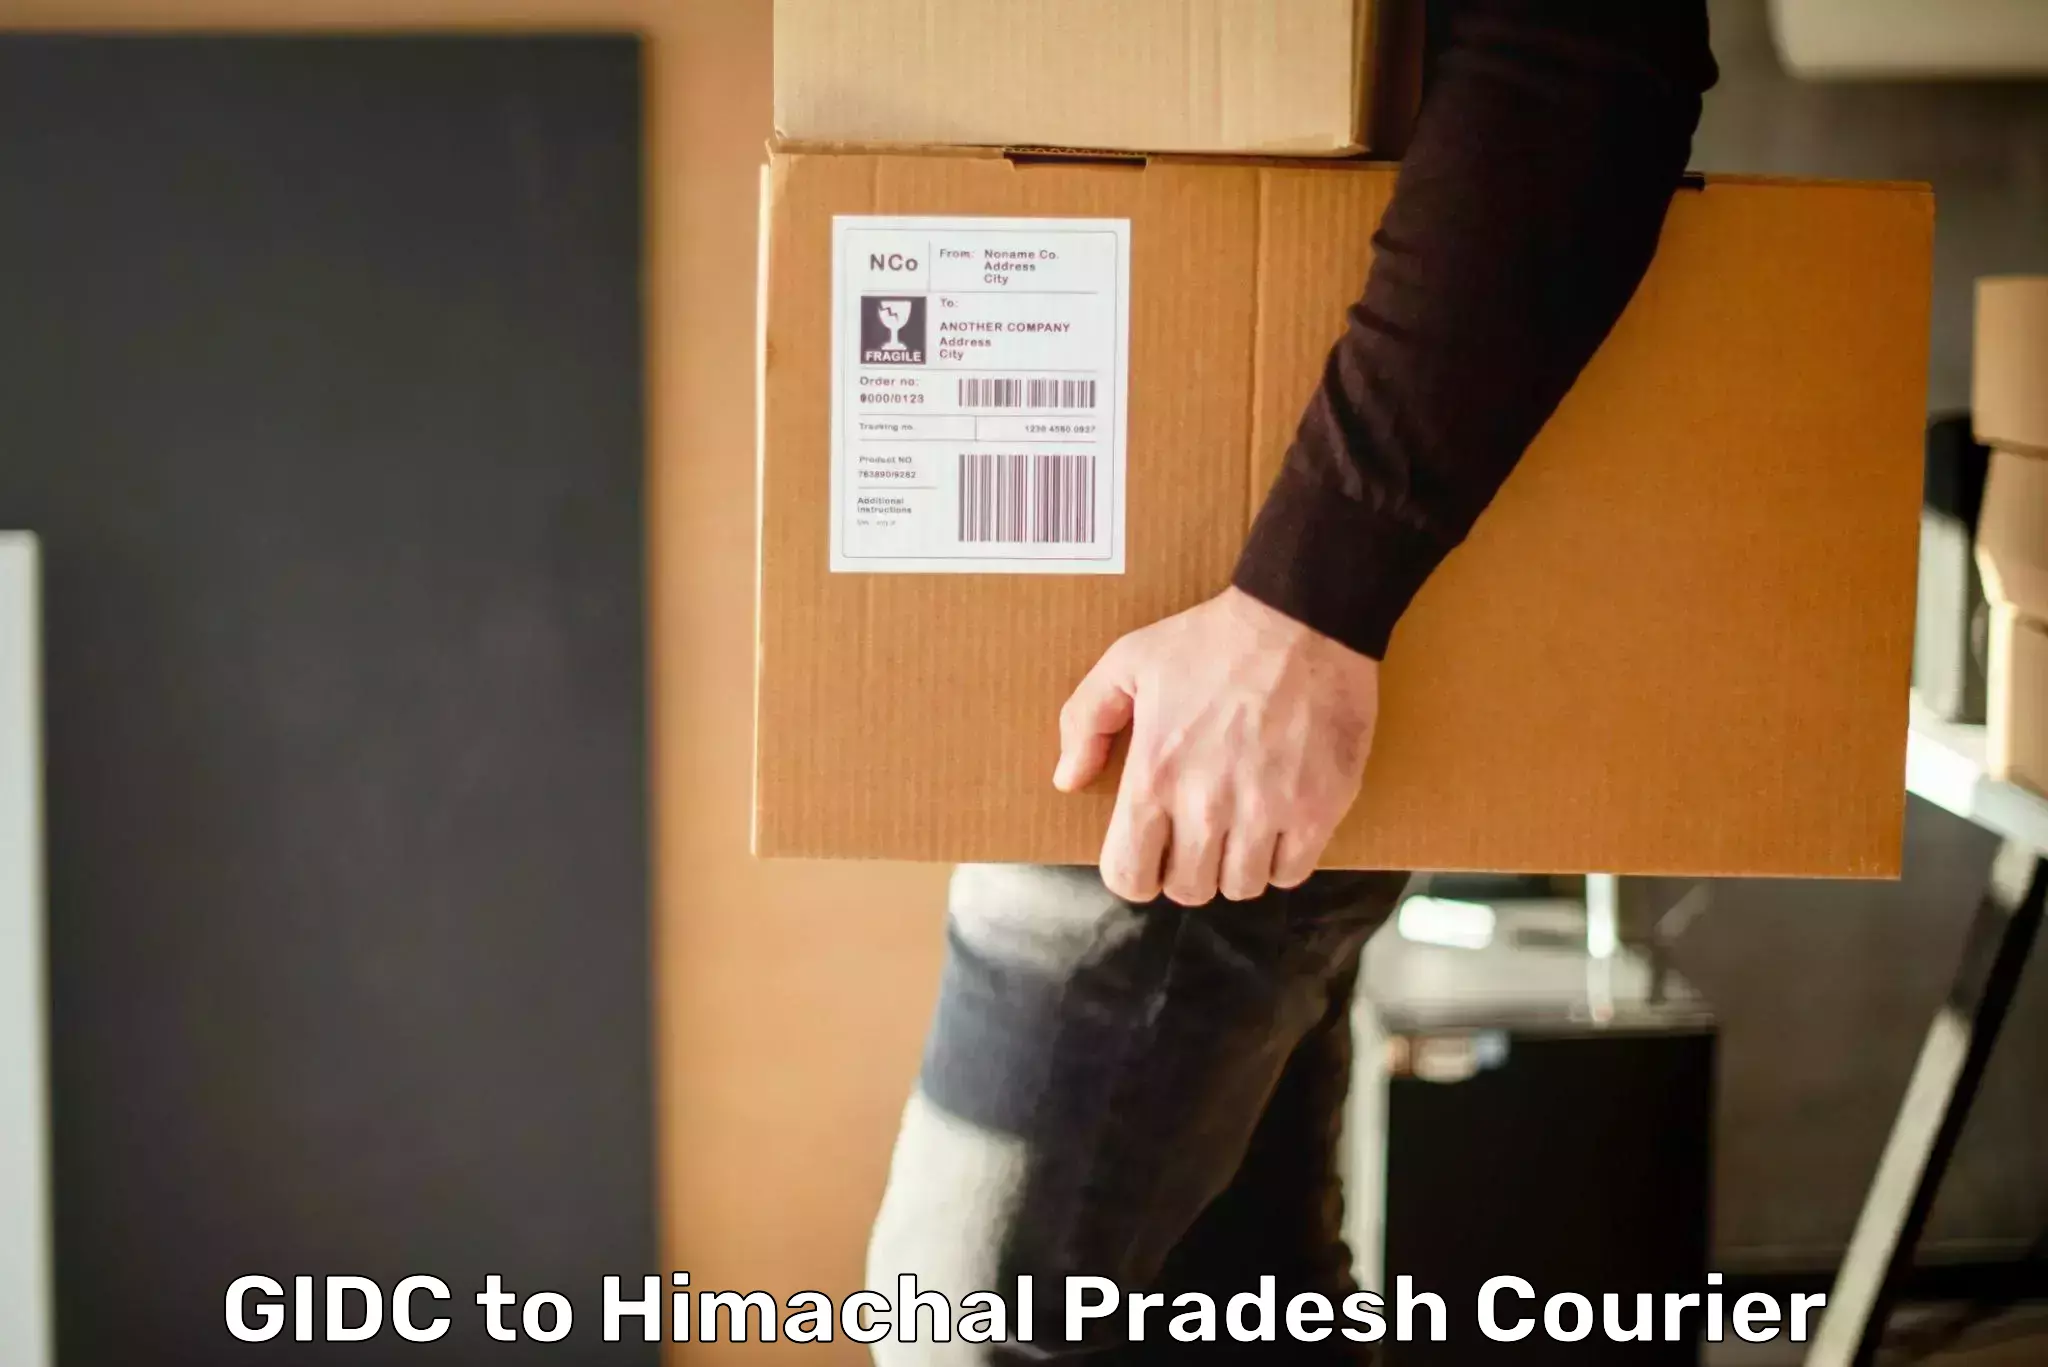 State-of-the-art courier technology GIDC to Himachal Pradesh